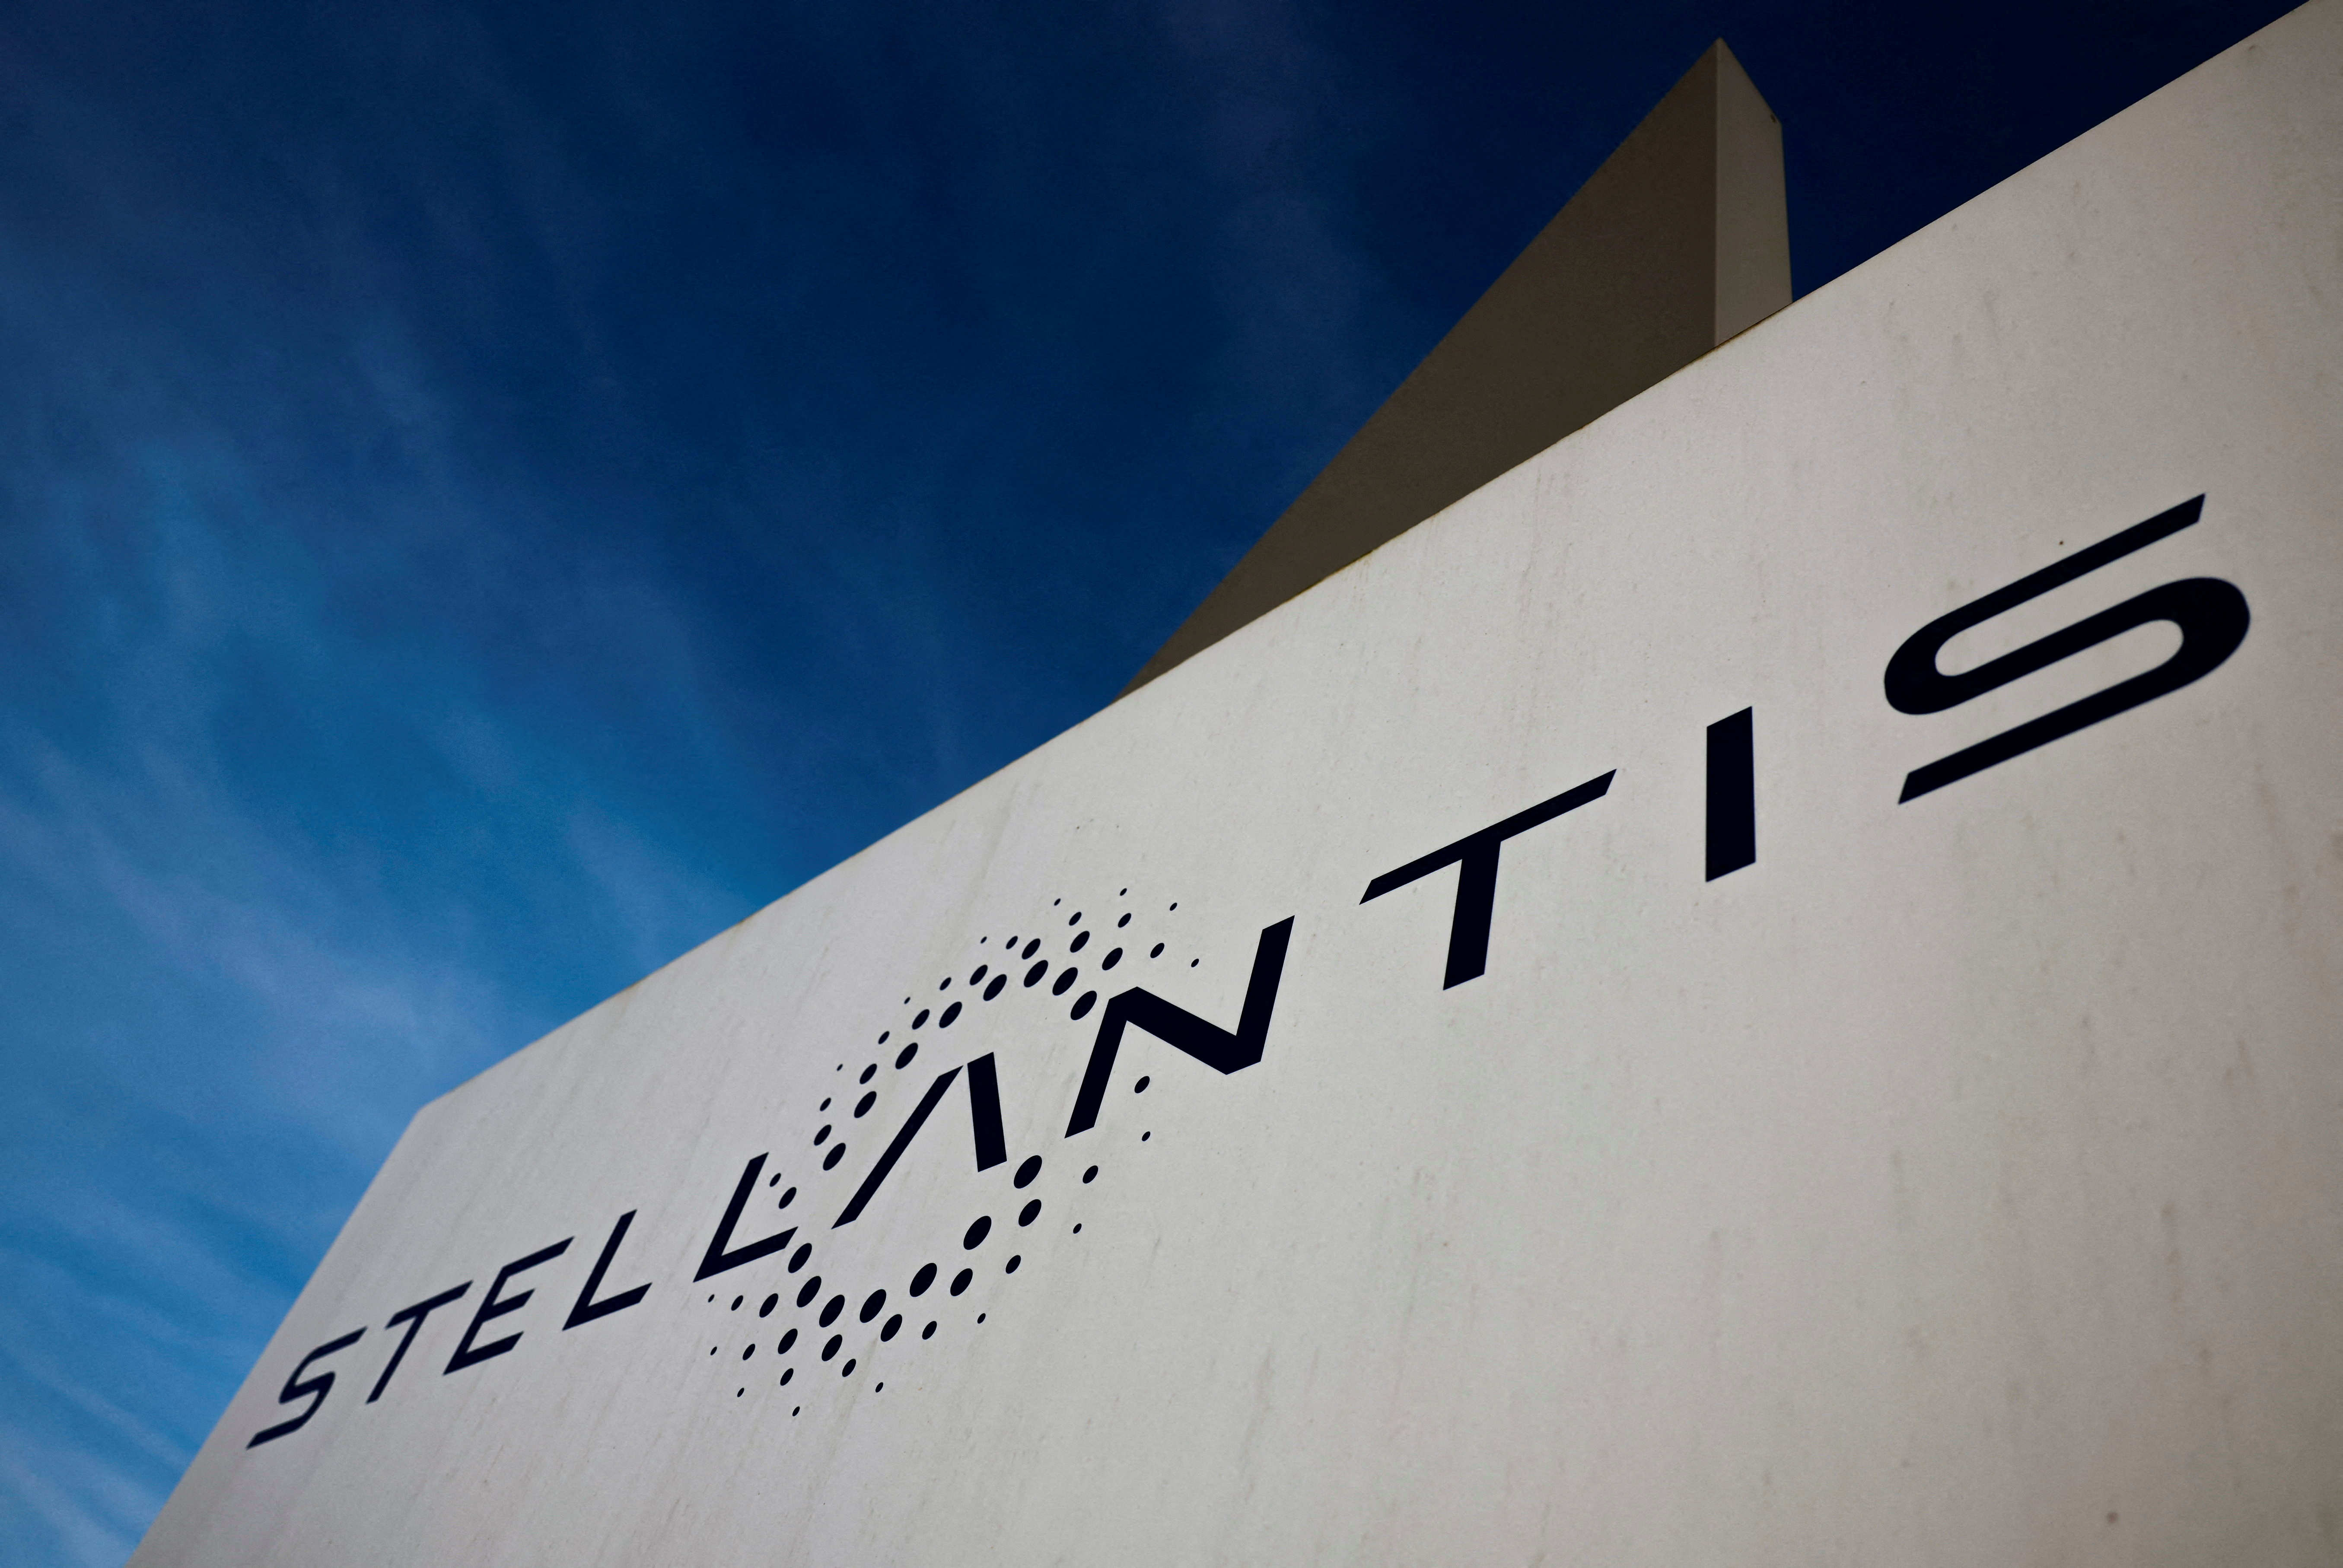 The logo of Stellantis is seen on the company's building in Velizy-Villacoublay near Paris